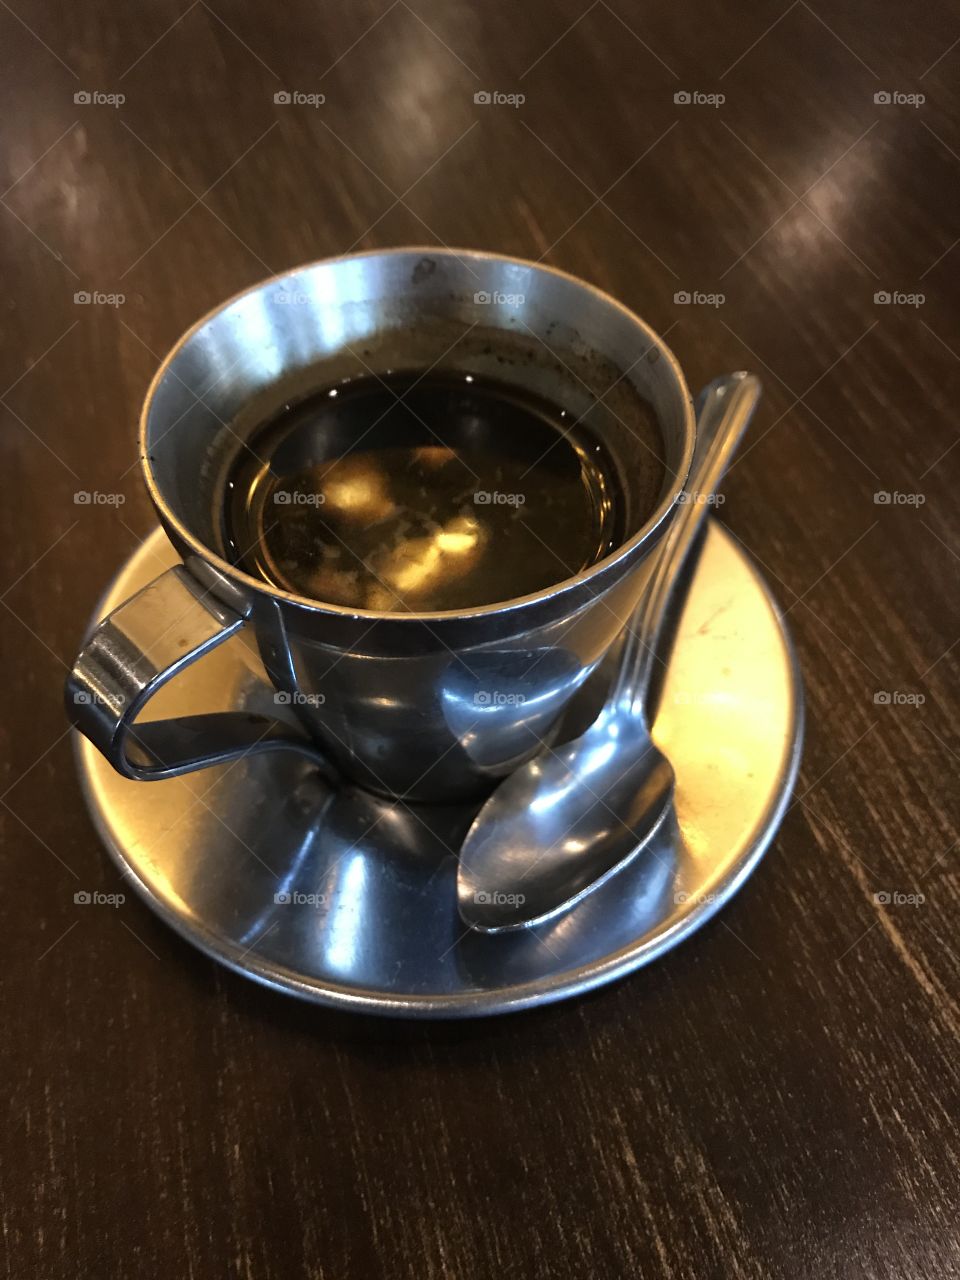 Small Cuban coffee espresso drink in a metal cup with a metal saucer can tiny spoon for sugar